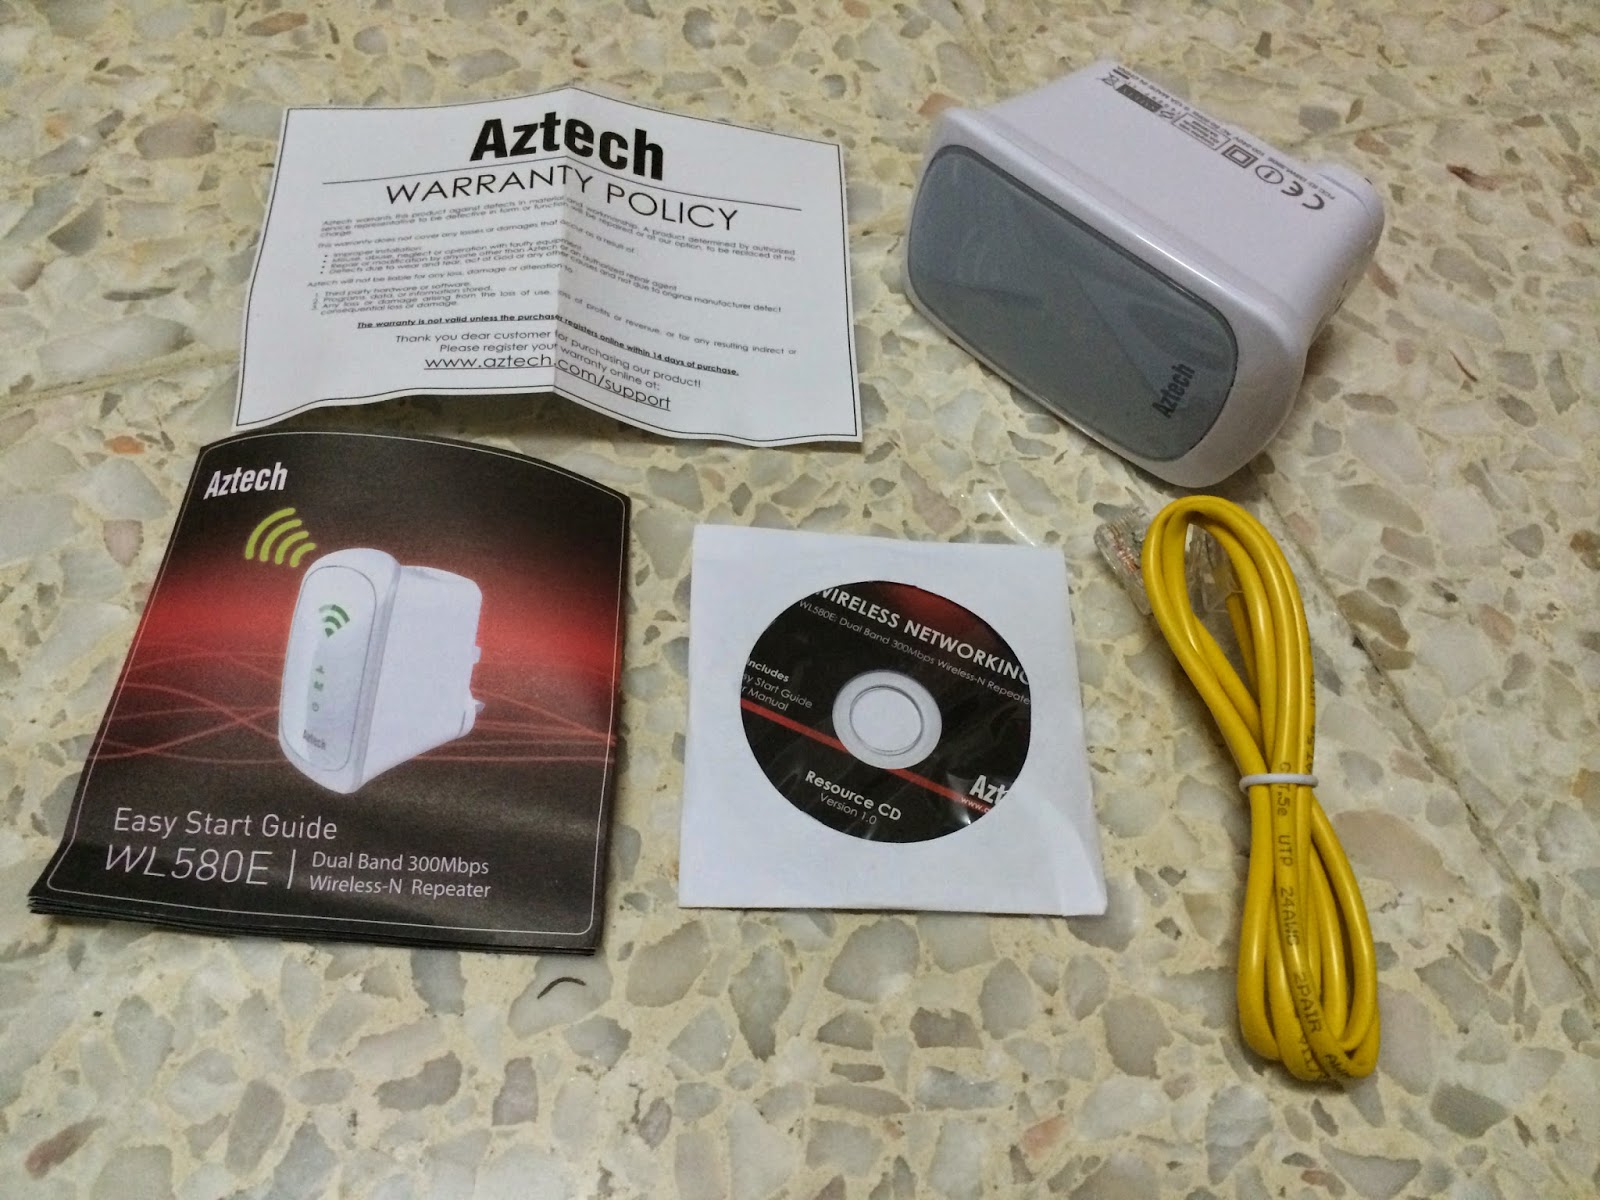 Unboxing & Review: Aztech WL580E Repeater 138